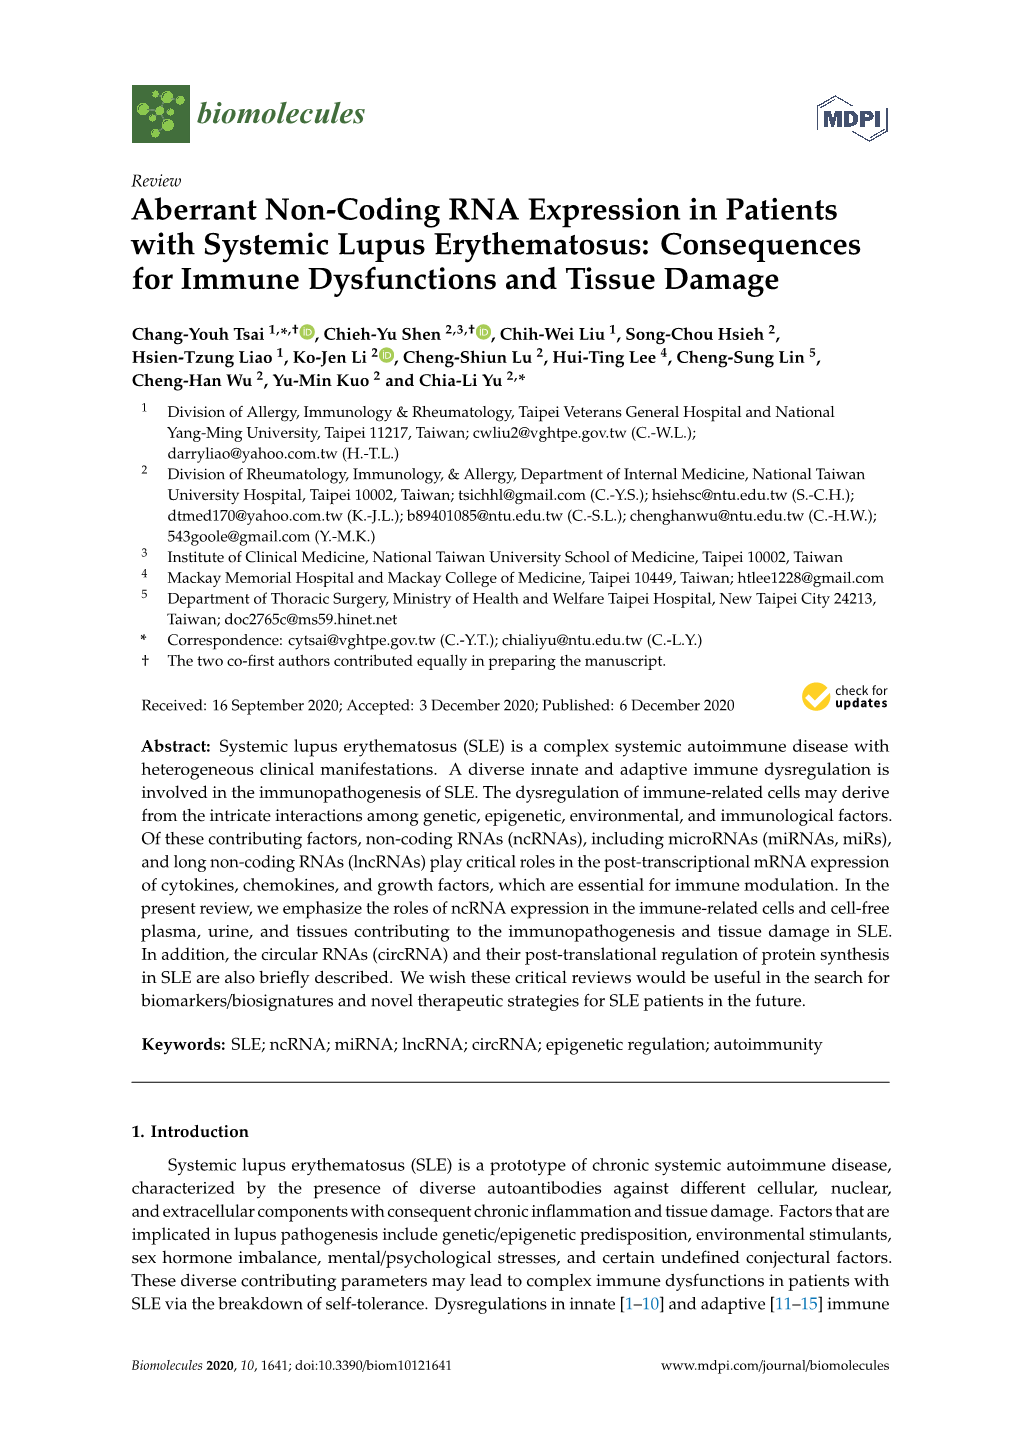 Aberrant Non-Coding RNA Expression in Patients with Systemic Lupus Erythematosus: Consequences for Immune Dysfunctions and Tissue Damage